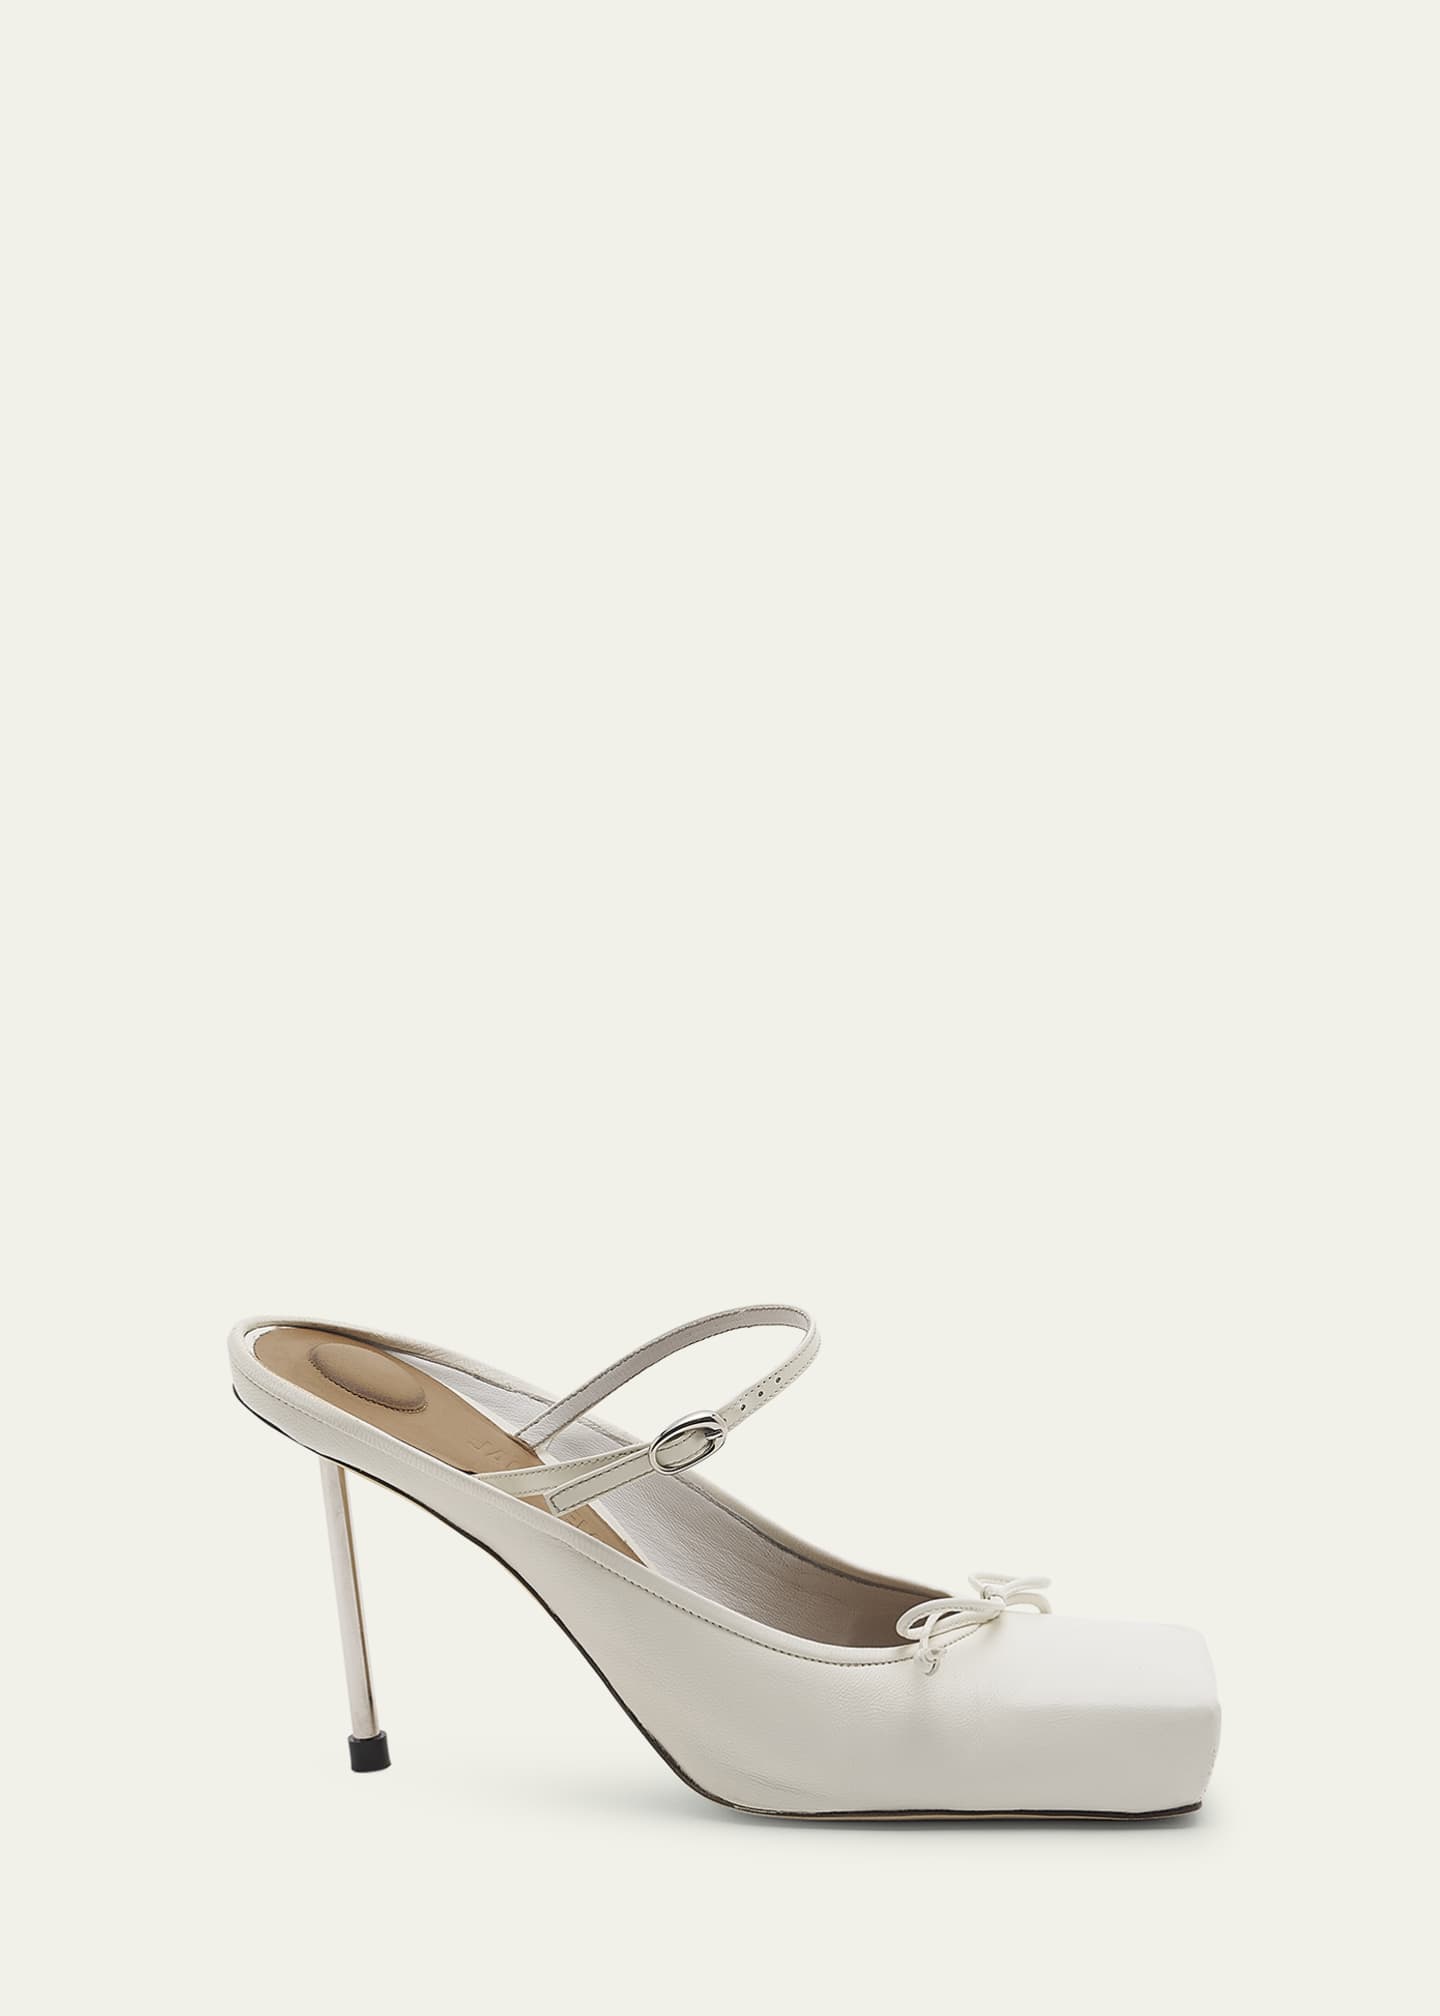 Jacquemus Les Chaussures Leather Ballet Mules - Bergdorf Goodman